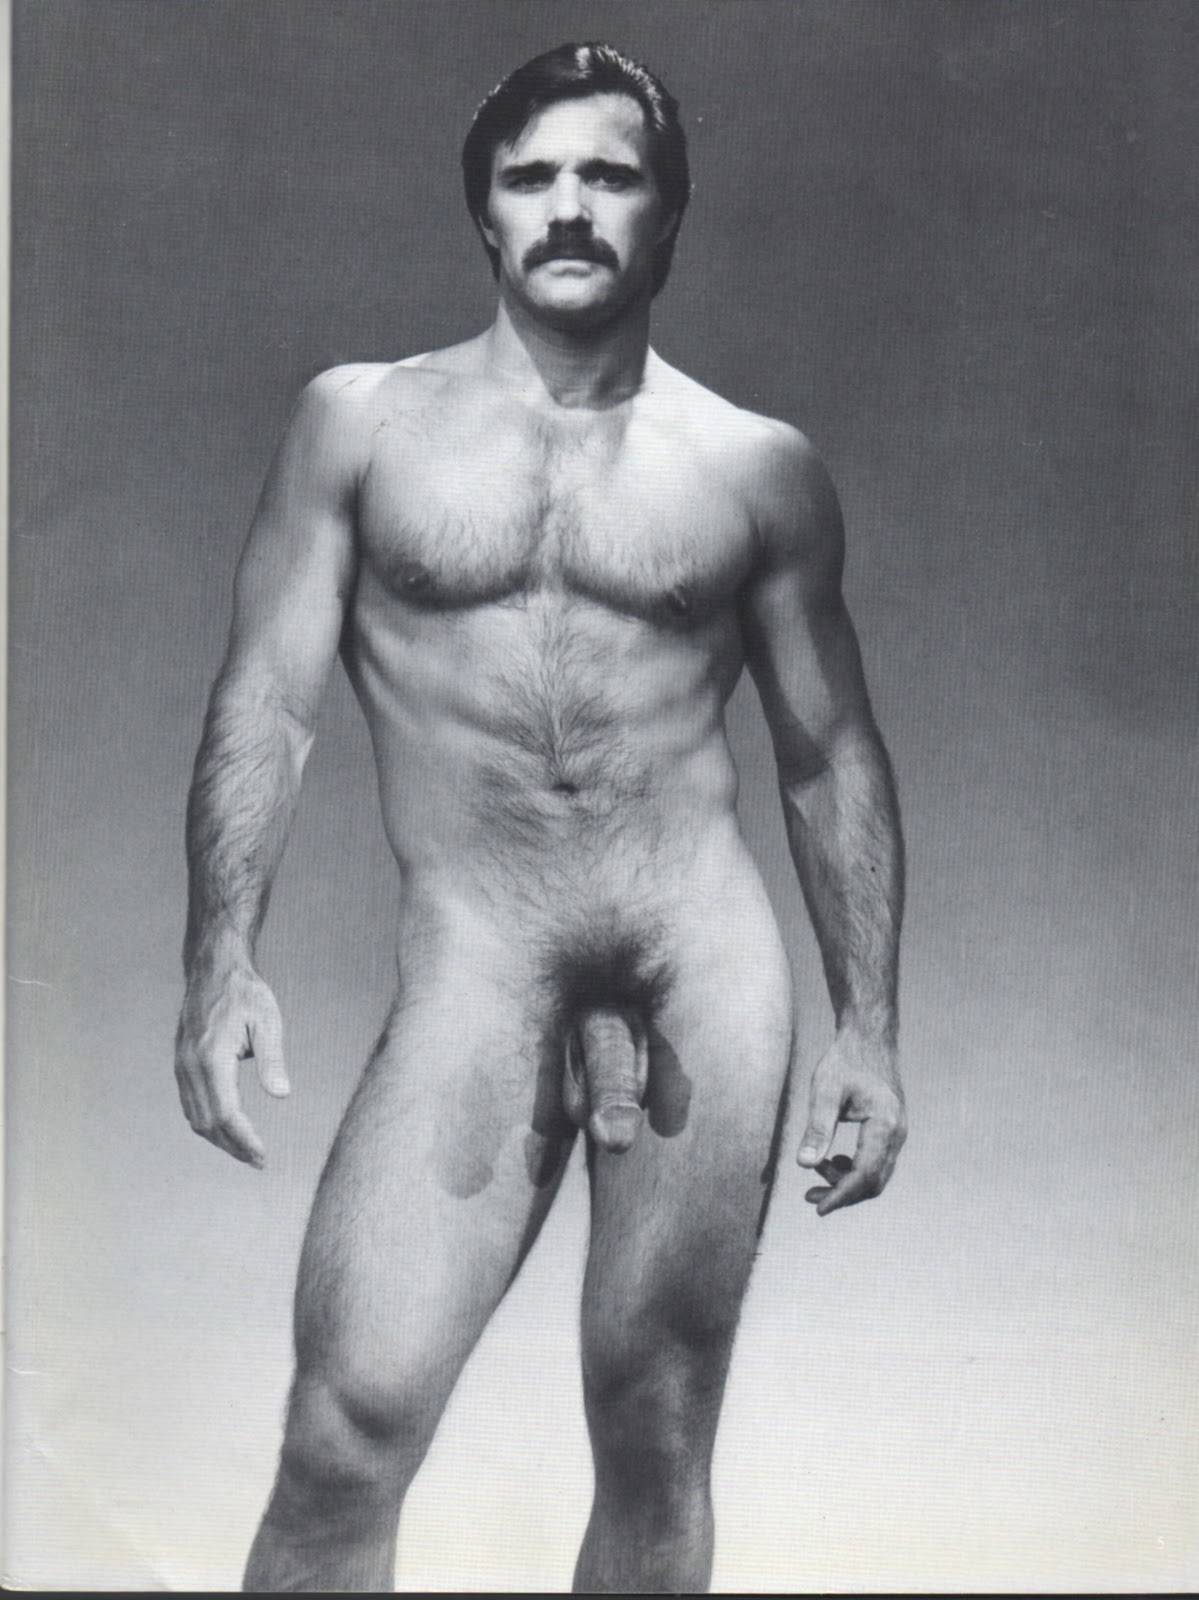 1970s Male Pornography - WEAR A MUSTACHE (MORE 70's Vintage PORN) | Daily Squirt